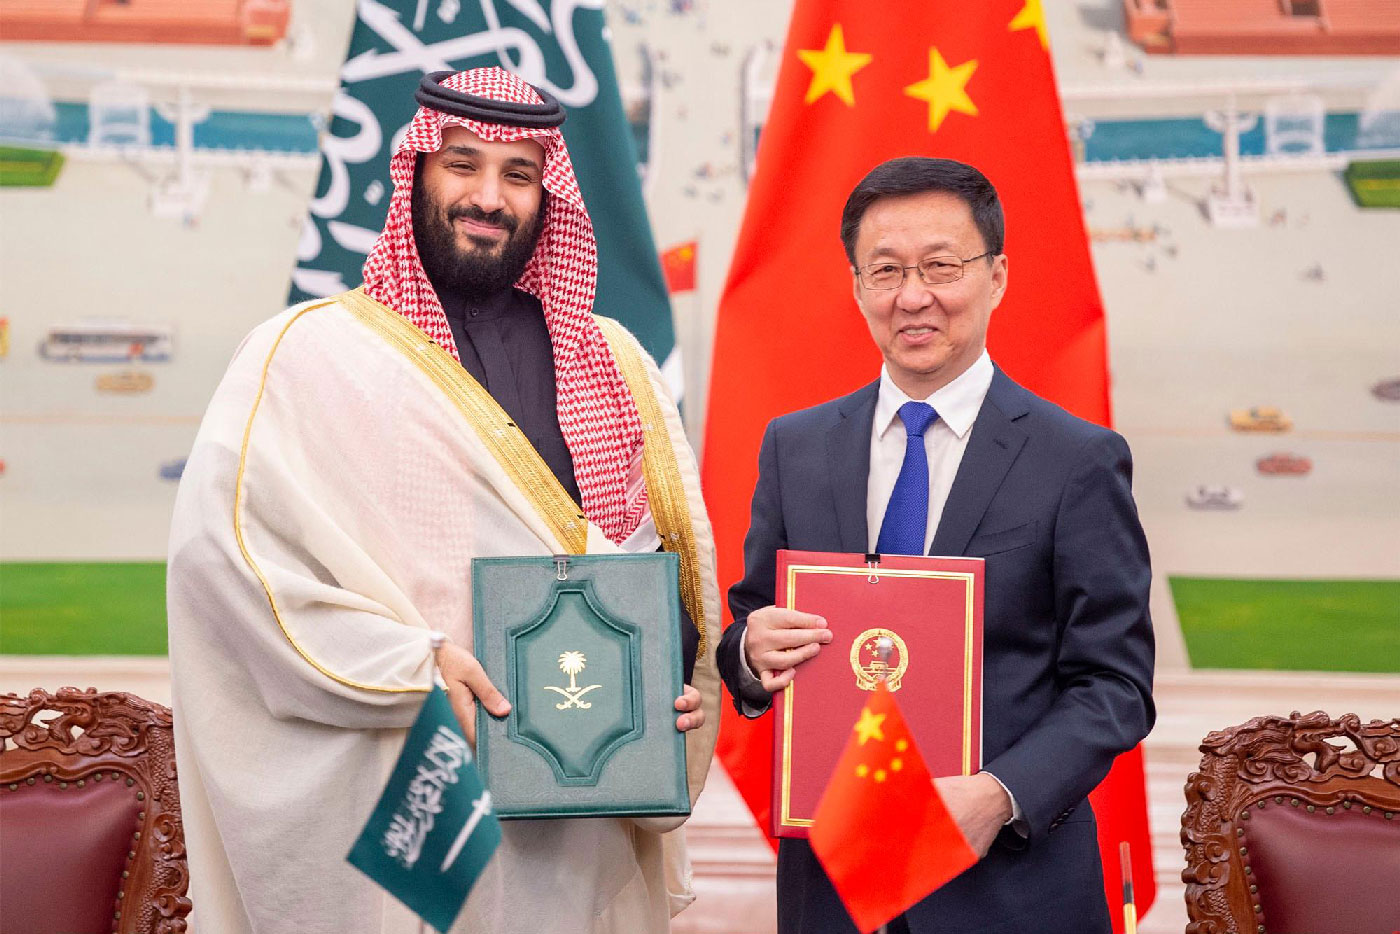 Saudi Crown Prince Mohammed bin Salman bin Abdulaziz Al Saud (L) and Han Zheng, Vice-Premier of the State Council of the People's Republic of China, pose for pictures during after the signing of memorandums of understanding at the Great Hall of the People in Beijing, China on 22 February 2019 . 